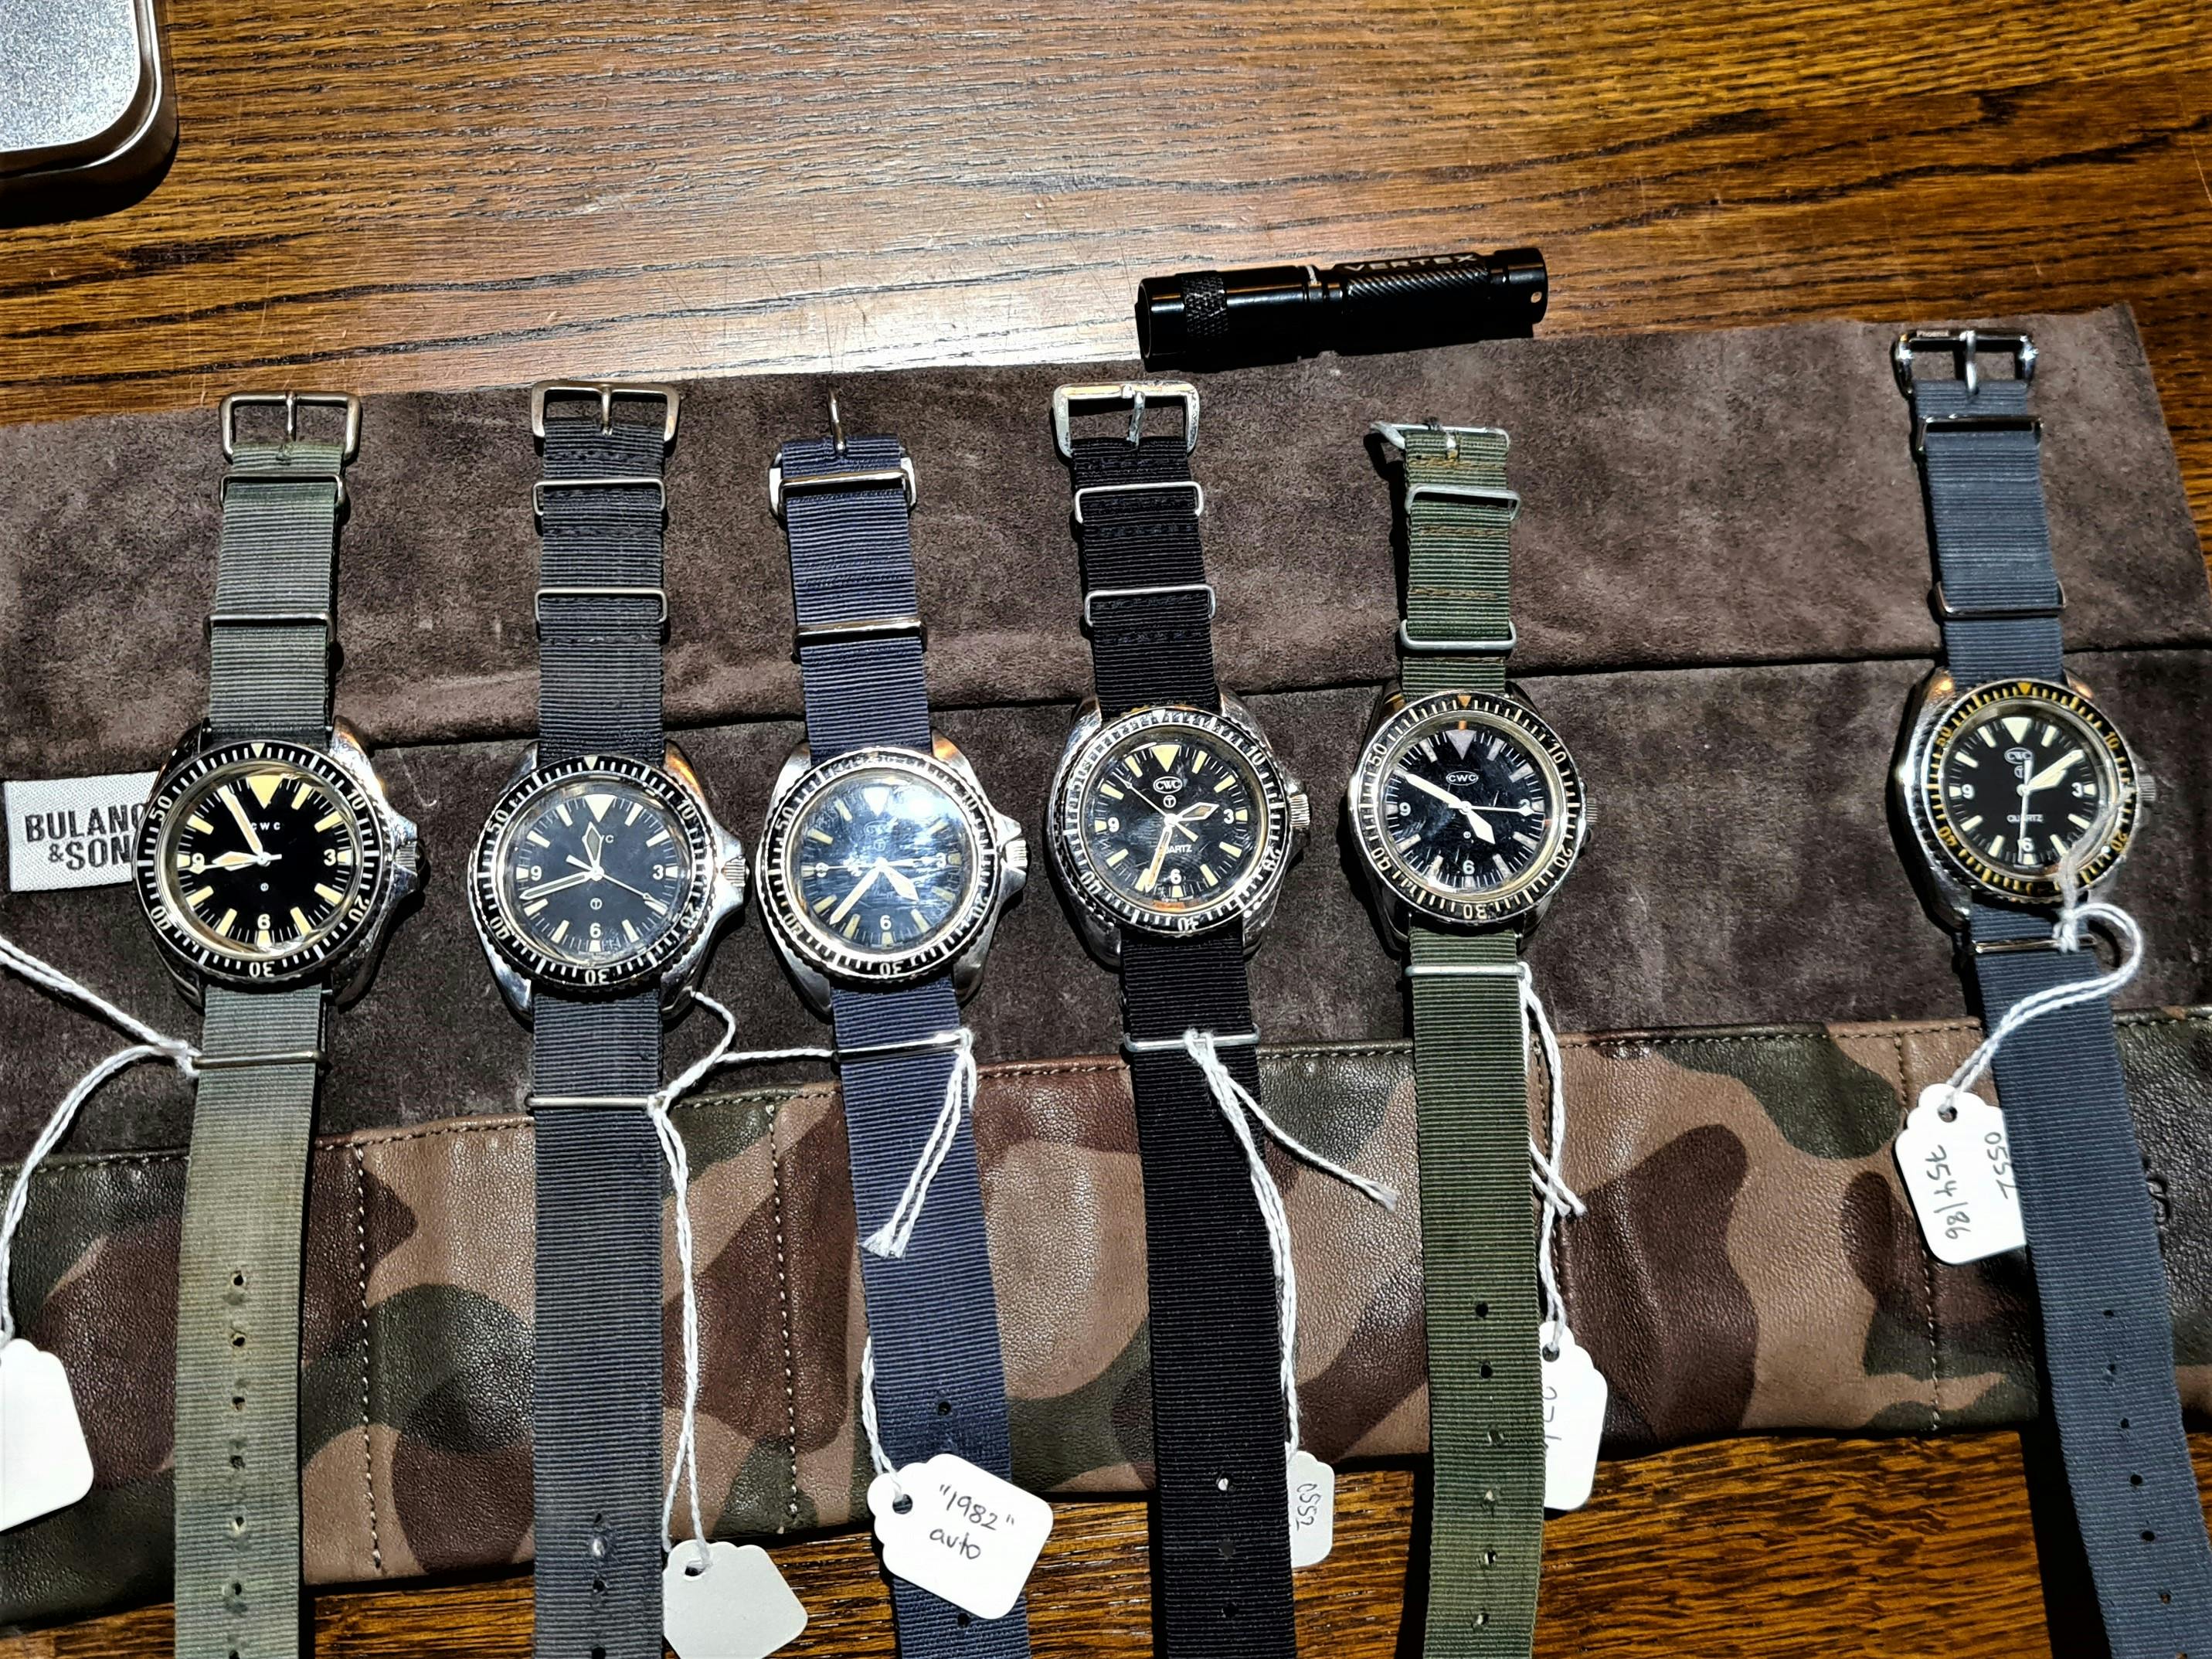 A collection of military watches. These will probably fetch the best price on a forum dedicated to military watch collectors